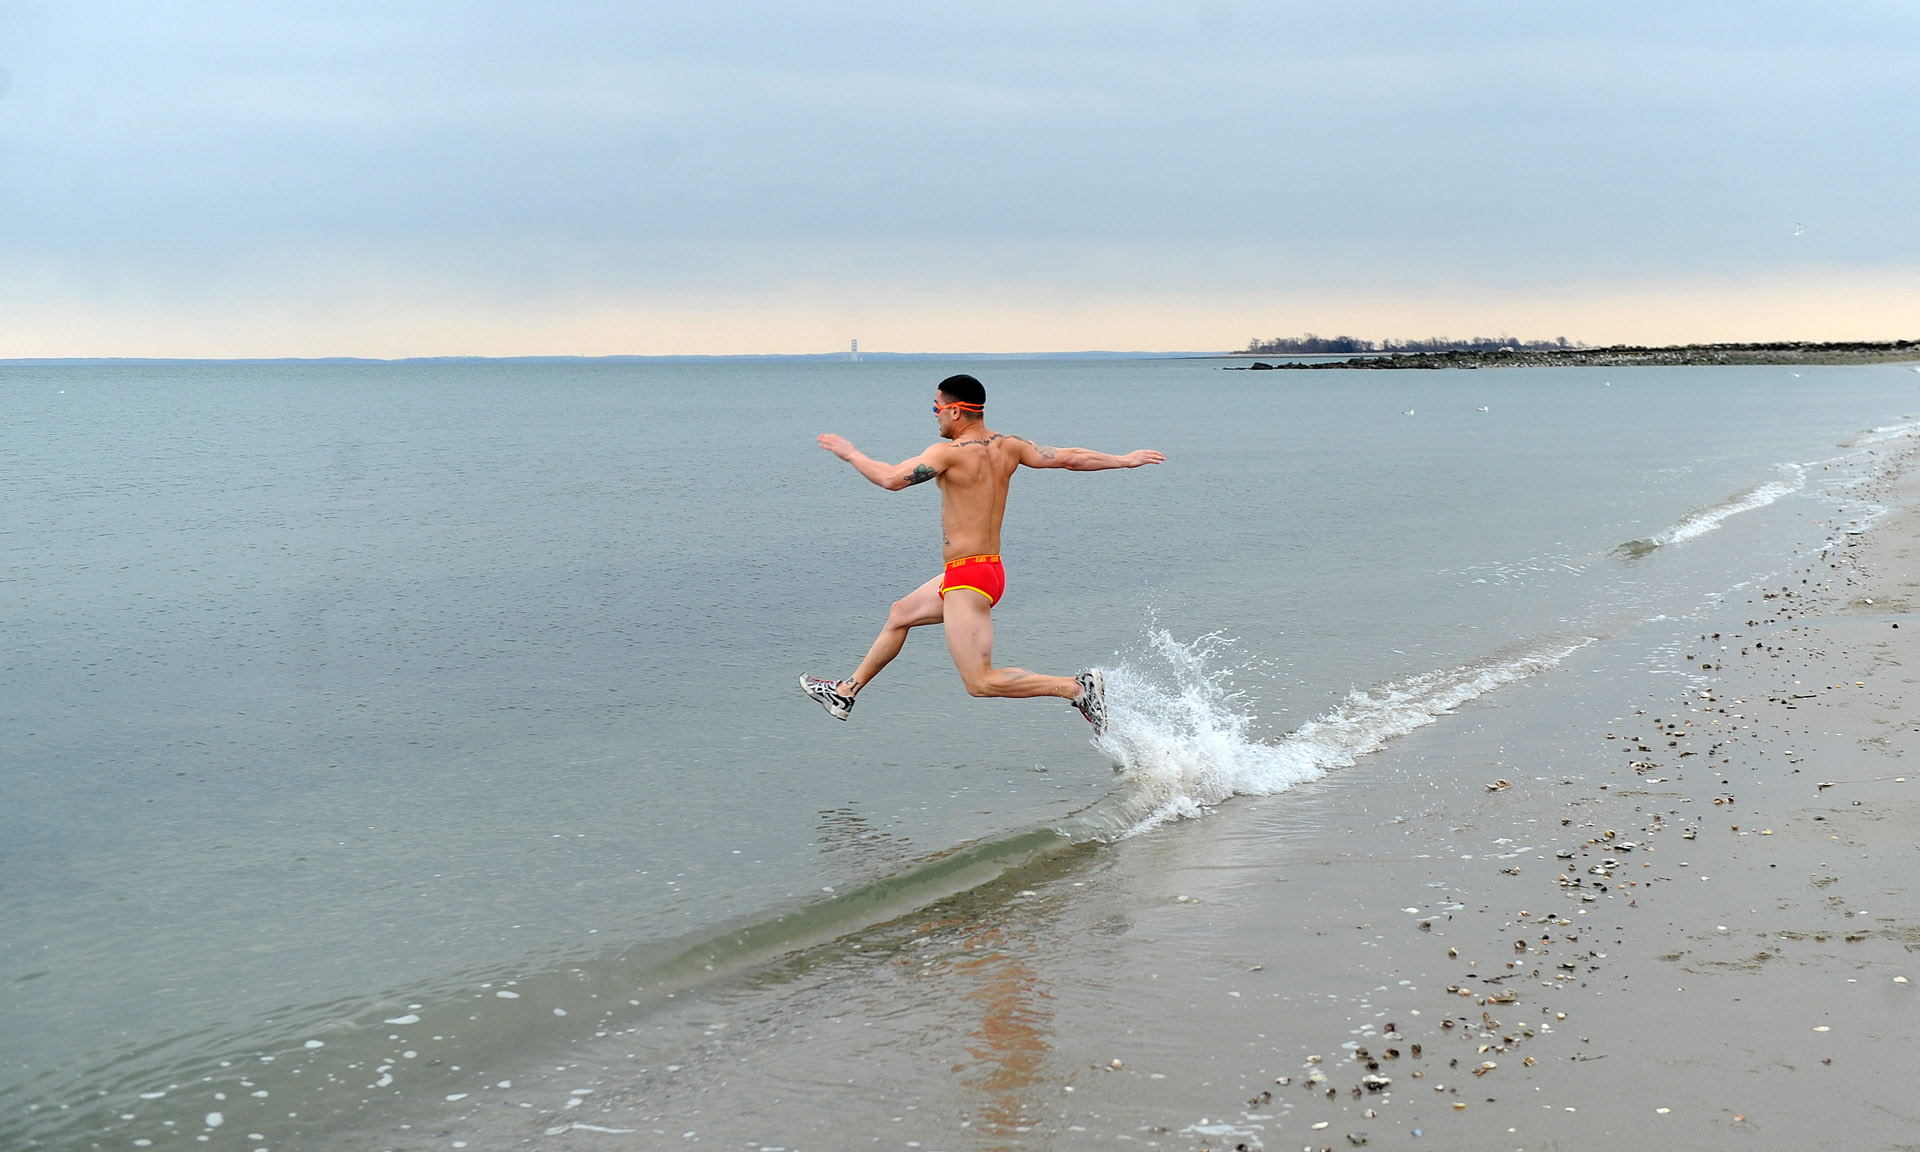  Ken Ildefonso is the first to run into the Long Island Sound at Compo Beach in Westport, Conn., during the Team Mossman Polar Plunge to benefit Save the Children, Tuesday morning, Jan. 1, 2013. 